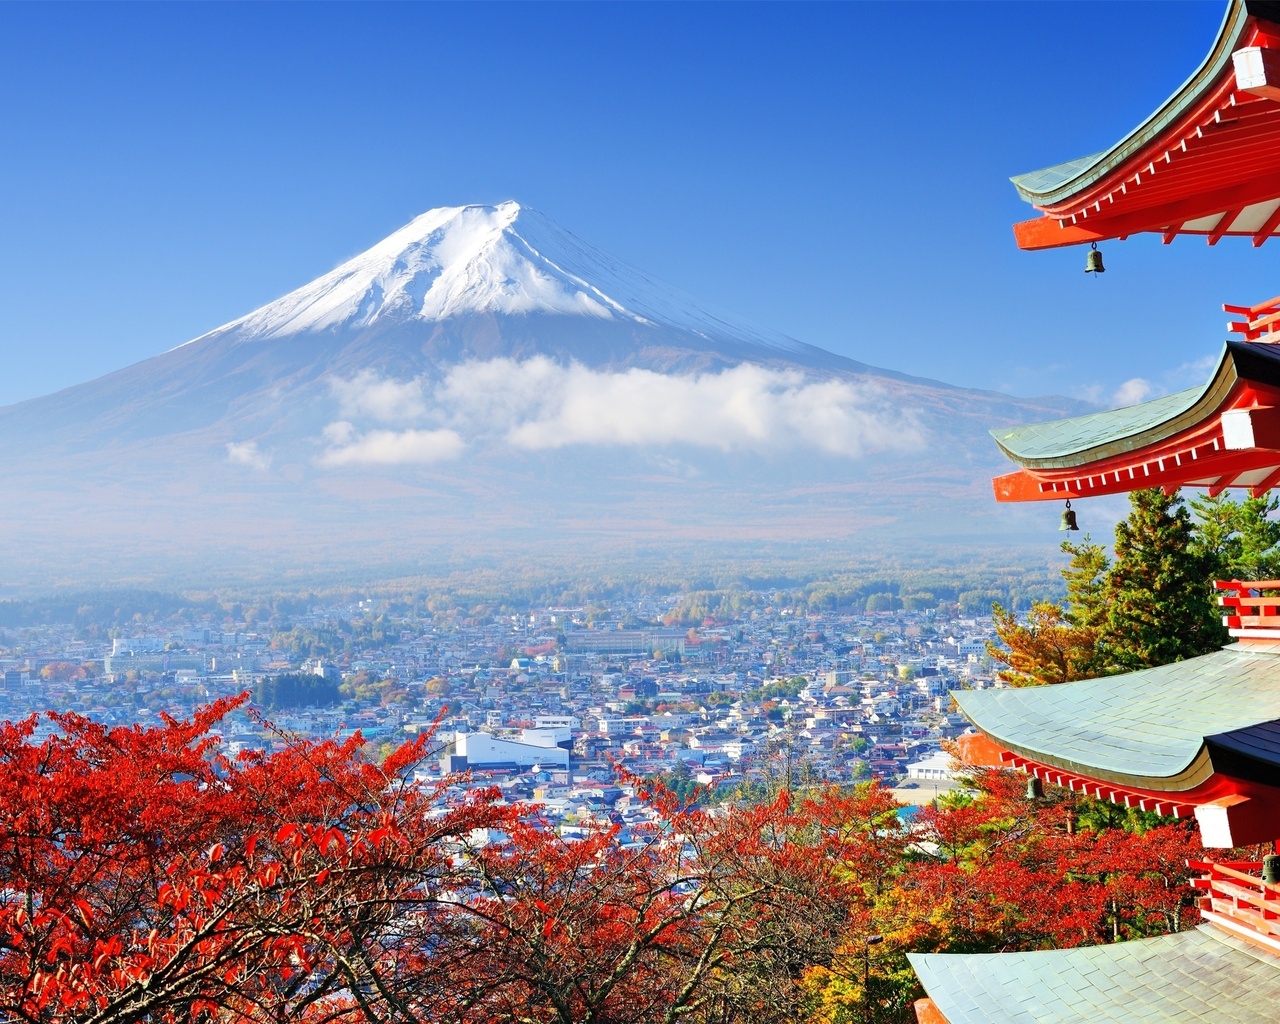 Fuji Mount in Japan for 1280 x 1024 resolution